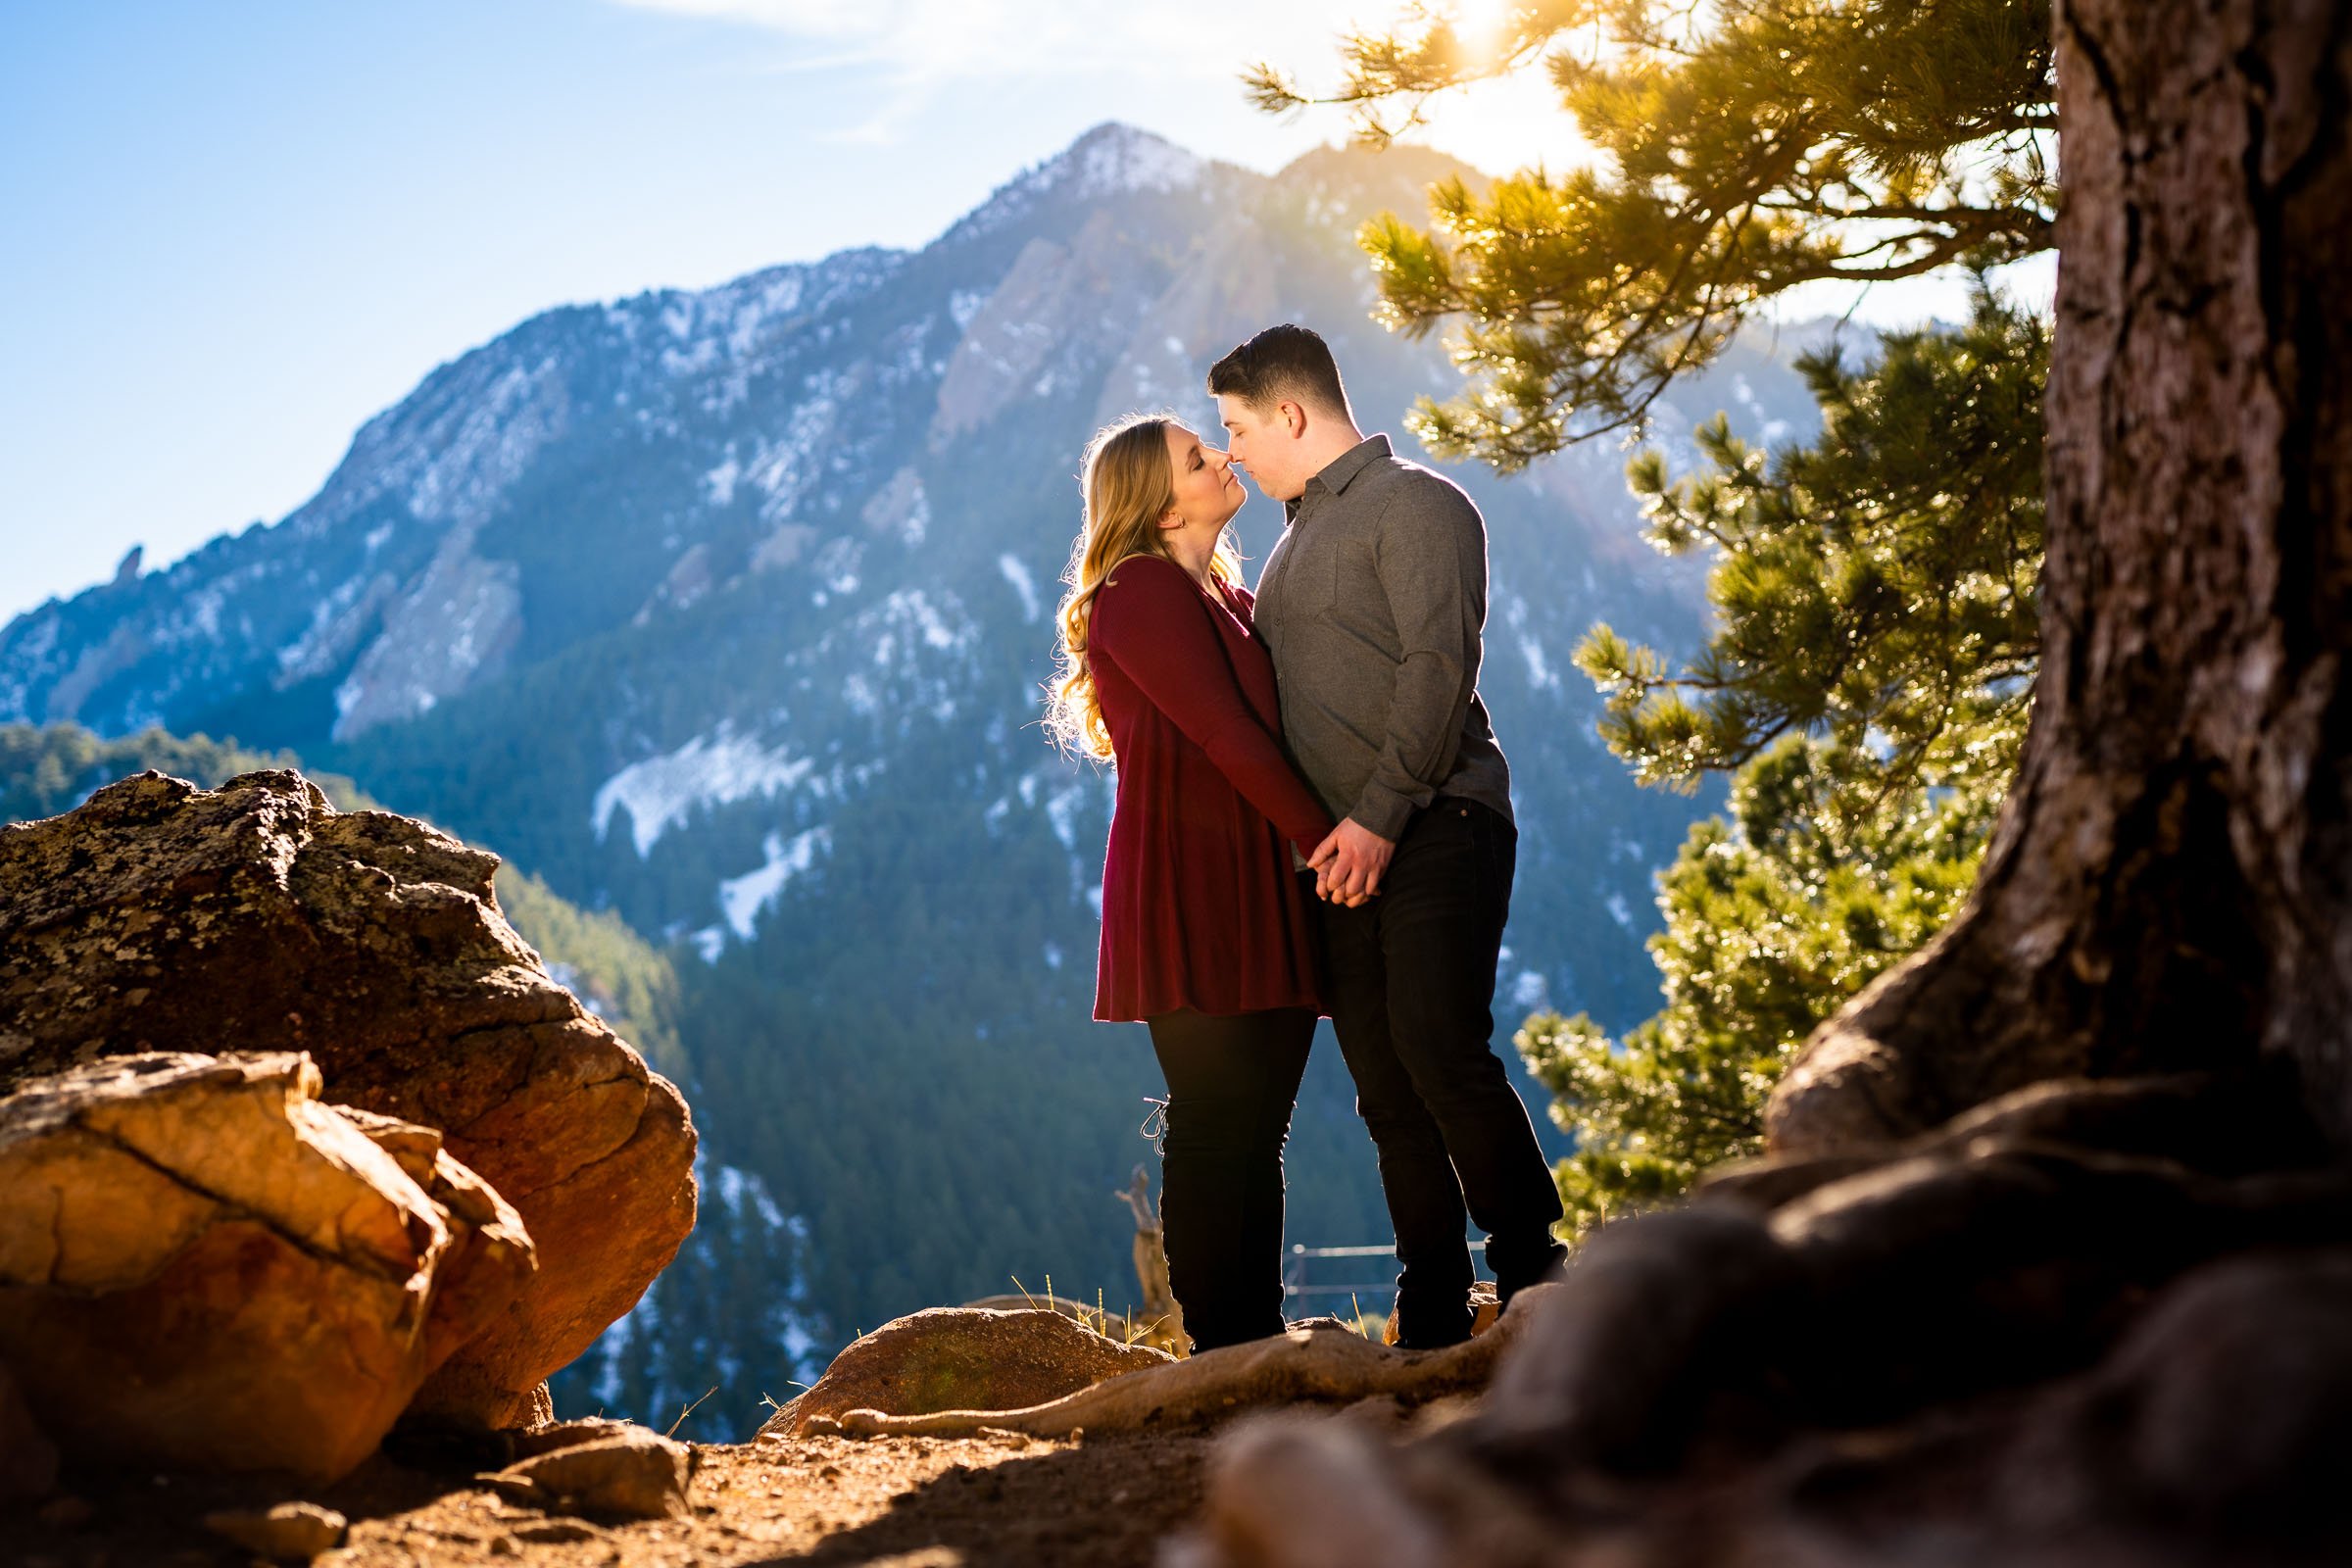 Couple poses for portraits during golden hour with mountains in the background, Mountain Engagement Photos, Engagement Session, Engagement Photos, Engagement Photos Inspiration, Engagement Photography, Engagement Photographer, Engagement Portraits, Winter Engagement Photos, Snow Engagement Photos, Boulder engagement session, Boulder engagement photos, Boulder engagement photography, Boulder engagement photographer, Boulder engagement inspiration, NCAR Trail engagement session, NCAR Trail engagement photos, NCAR Trail engagement photography, NCAR Trail engagement photographer, NCAR Trail engagement inspiration, Colorado engagement session, Colorado engagement photos, Colorado engagement photography, Colorado engagement photographer, Colorado engagement inspiration